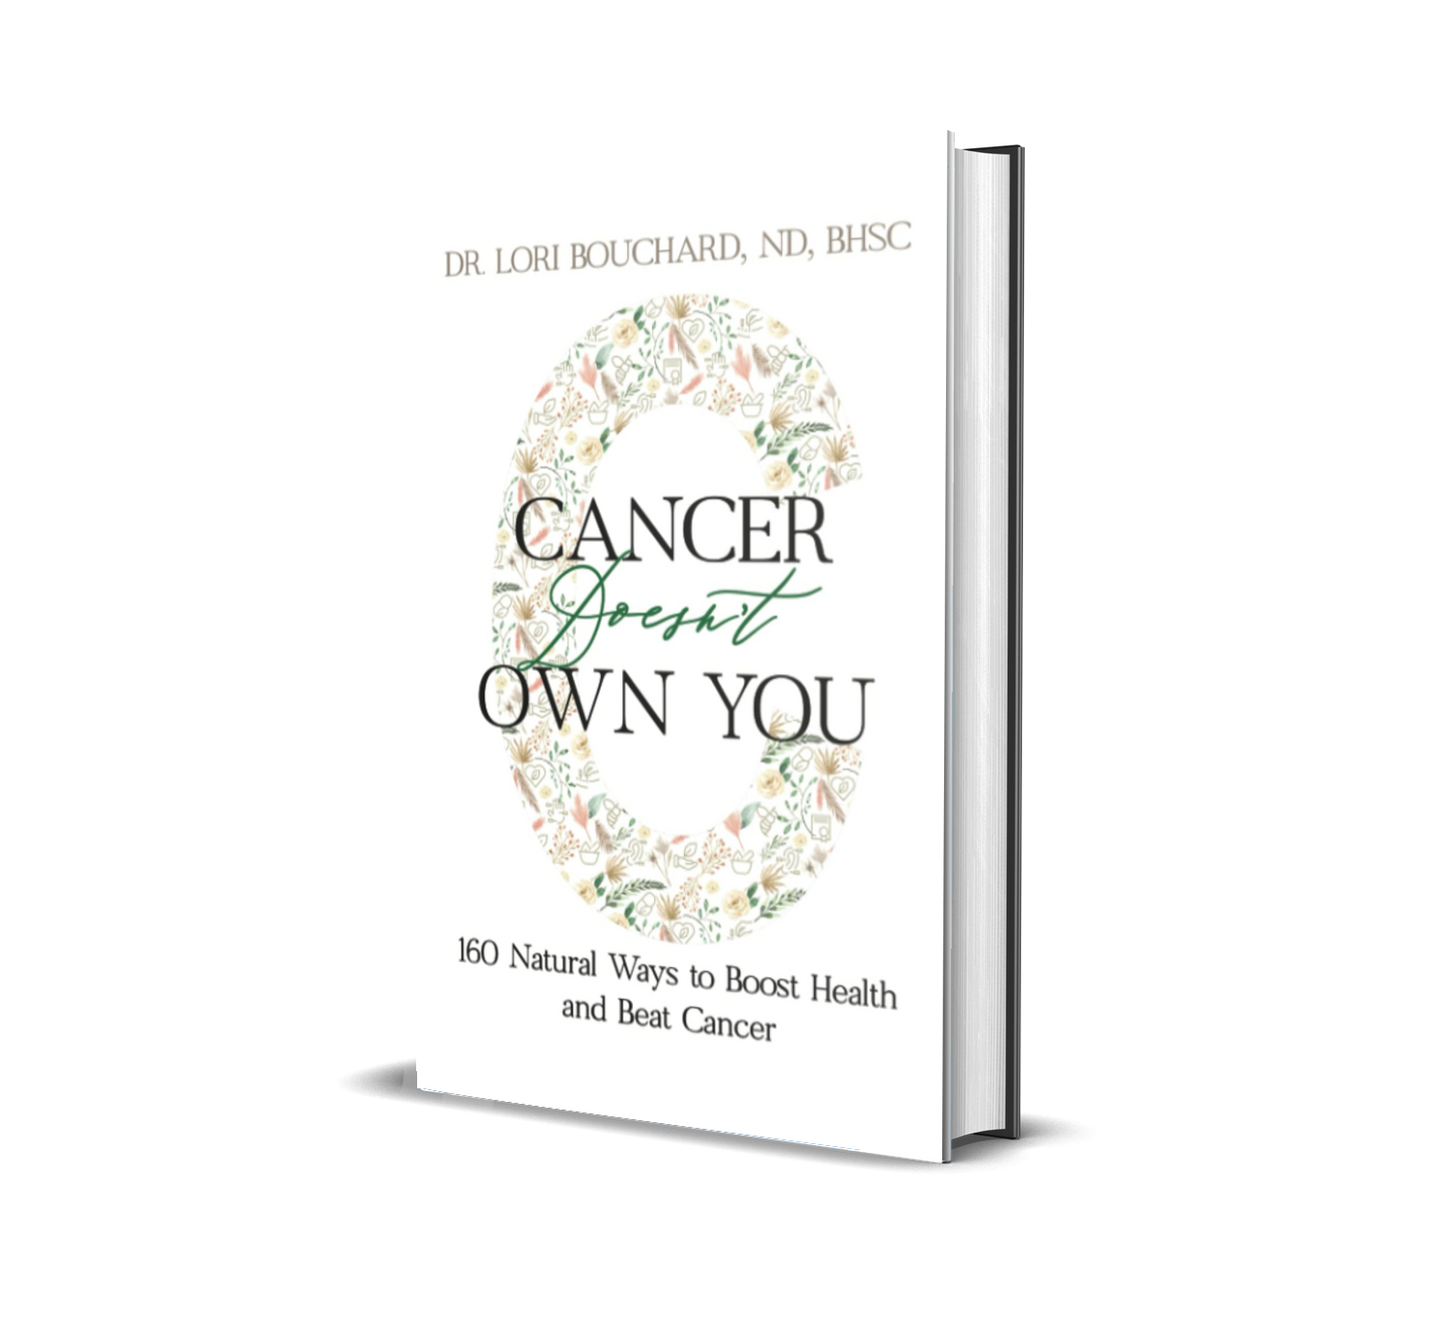 Cancer Doesn't Own You